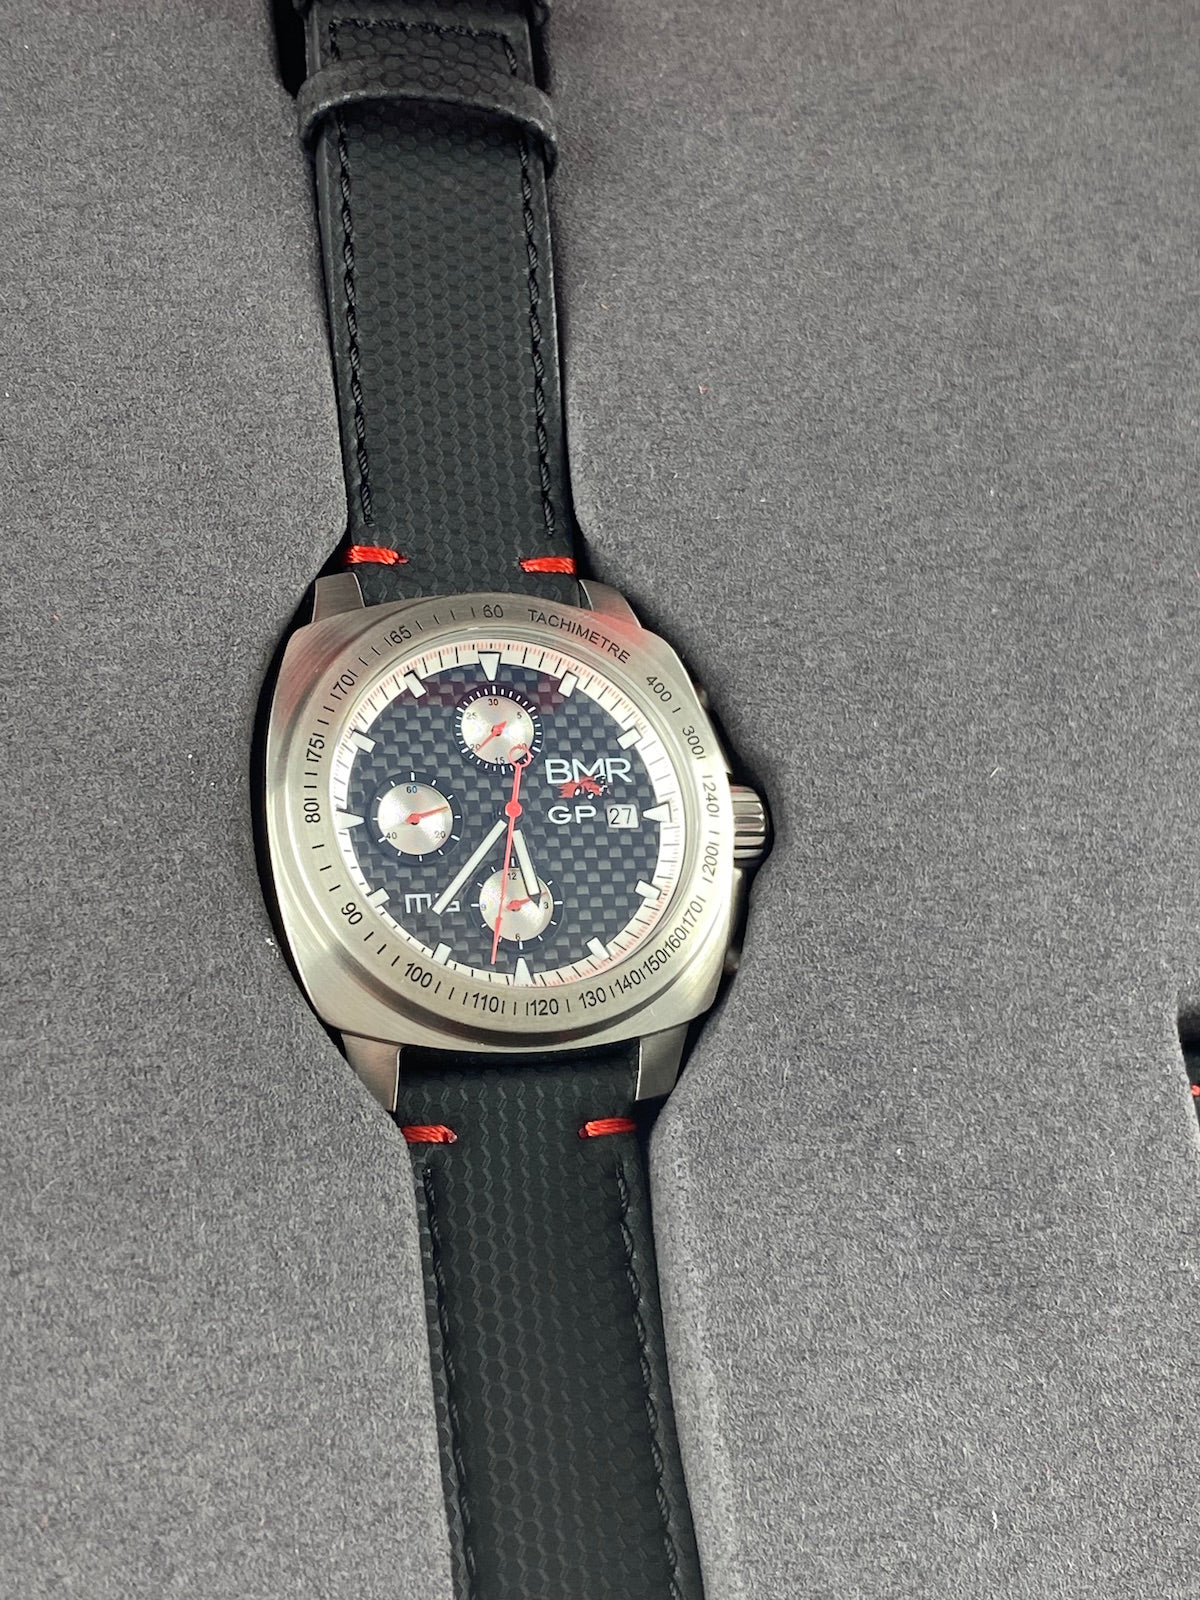 Exclusive Big Machine Music City Grand Prix Limited Chronograph Signed By Race Winner Marcus Ericsson